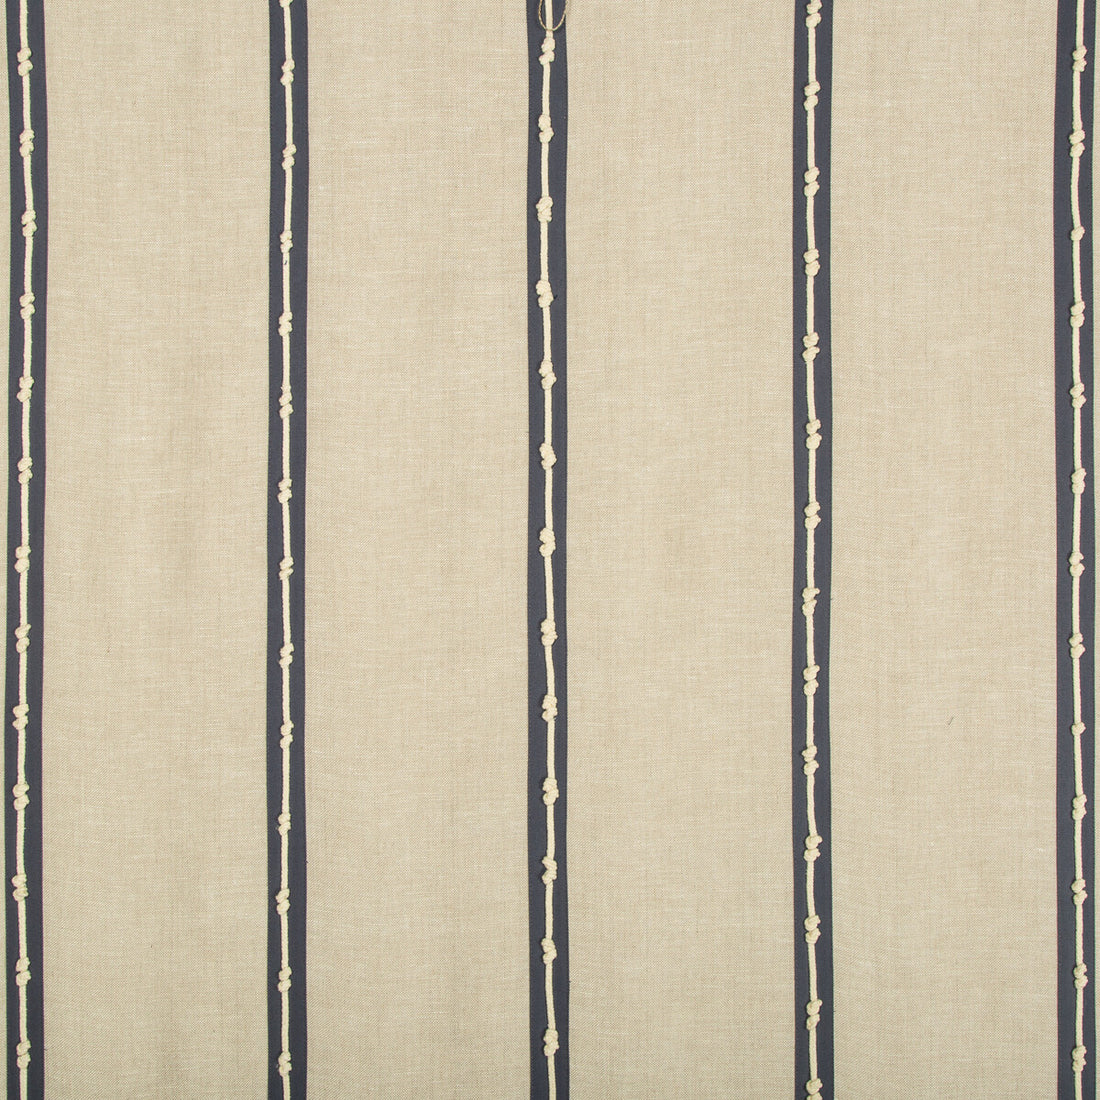 Knots Speed fabric in heron color - pattern 4630.516.0 - by Kravet Design in the Barclay Butera Sagamore collection